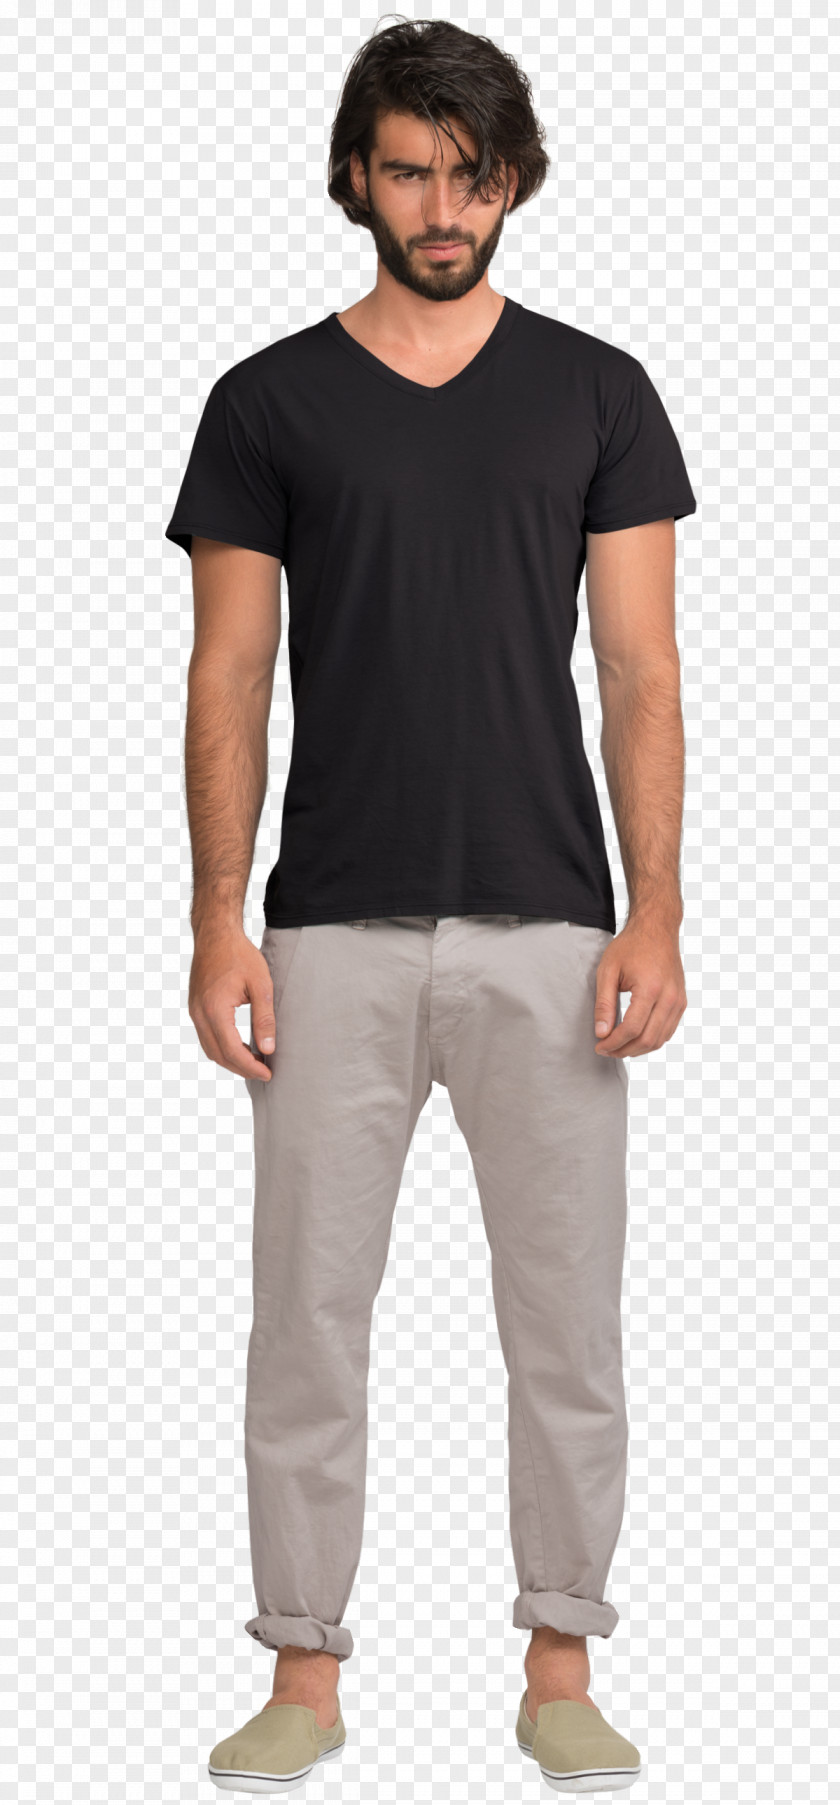 Walter White T-shirt Clothing Top Amazon.com PNG